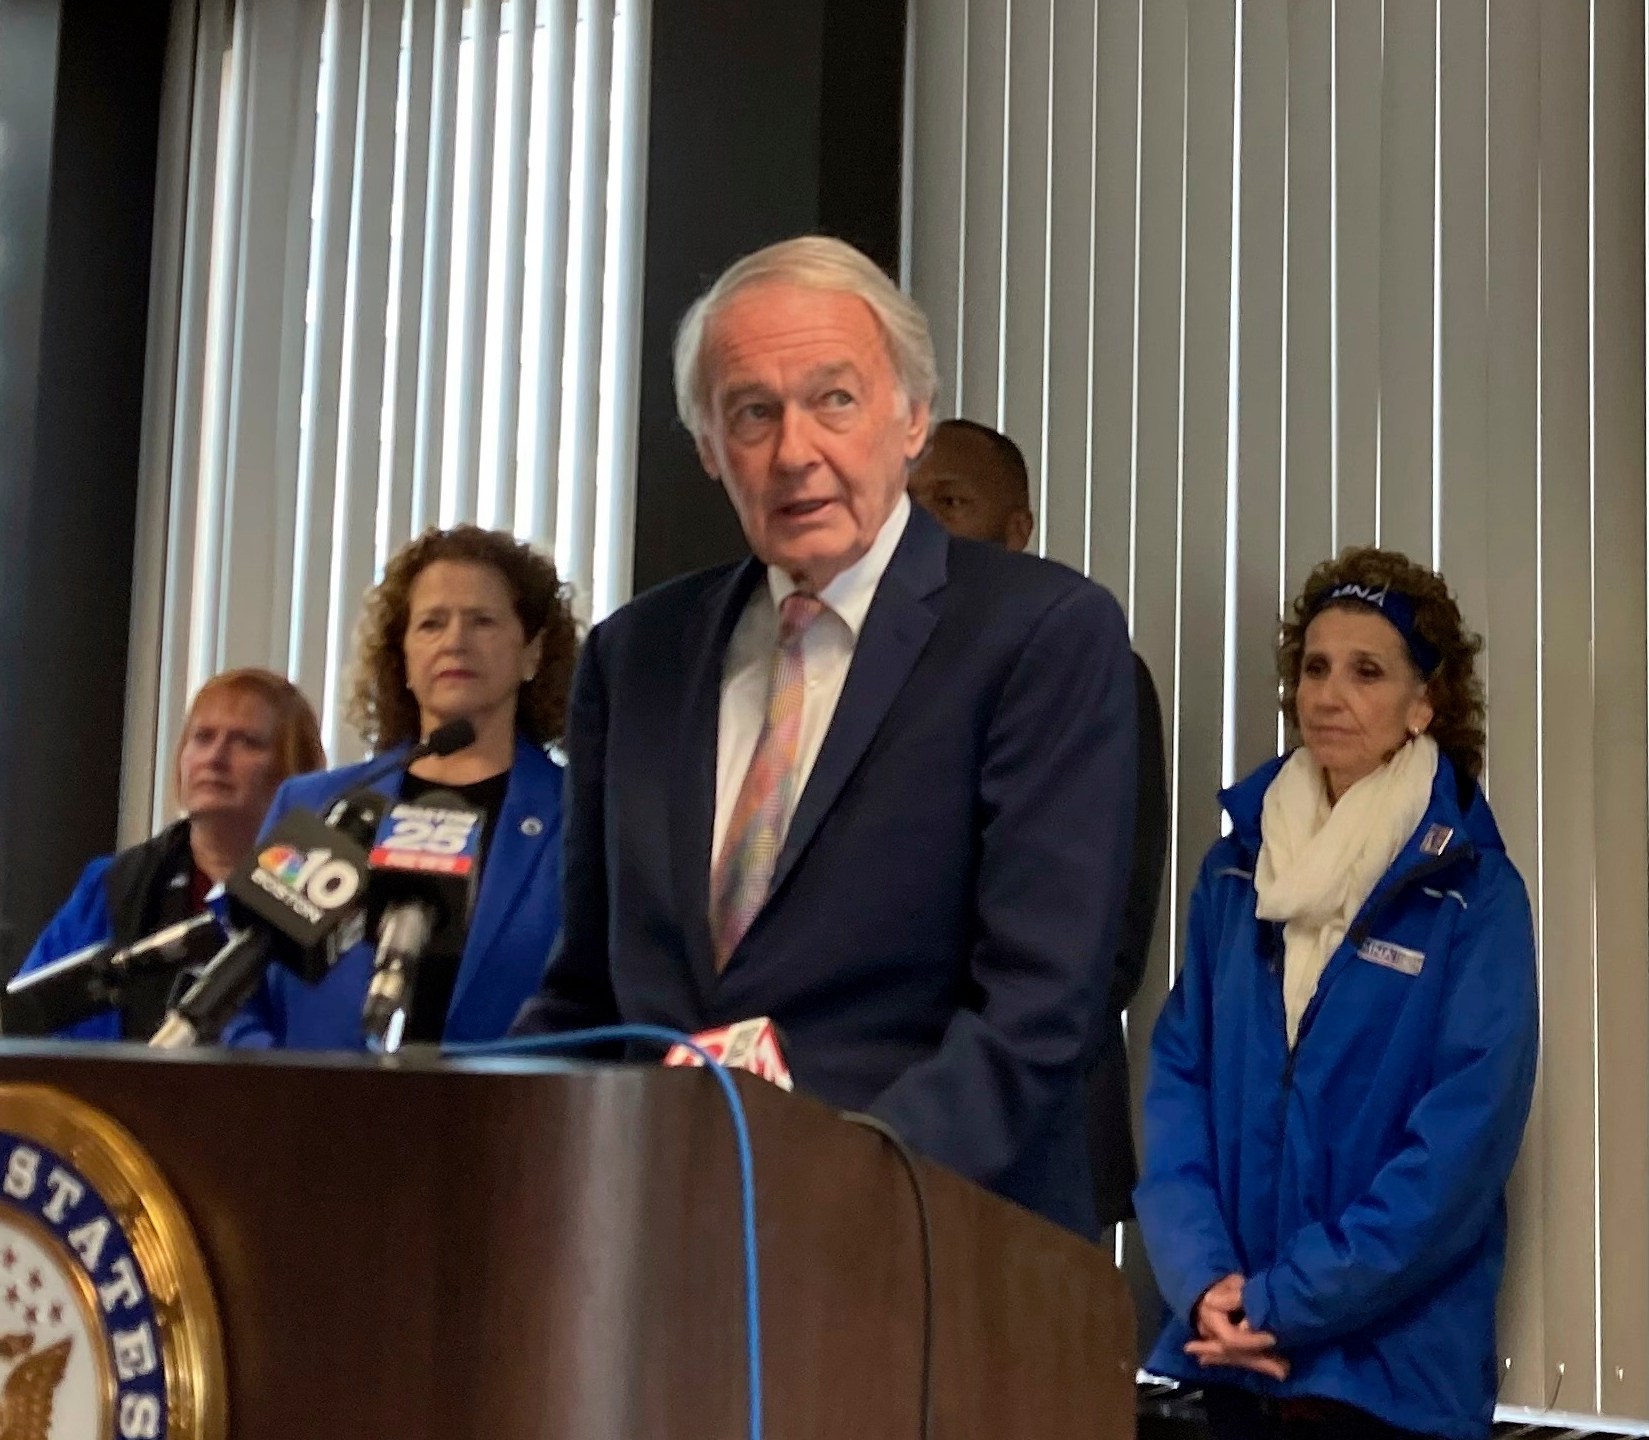 Democratic U.S. Sen. Edward Markey called on Wednesday, March 27, 2024, for greater oversight of a deal that financially embattled hospital operator Steward Health Care has struck to sell its nationwide physician network to Optum, a subsidiary of UnitedHealth Group, at a press conference in his office at the John F. Kennedy Federal Building in Boston. Markey said Optum must show it can protect health care access by controlling costs and putting patients and providers first. (AP Photo/Steve LeBlanc)